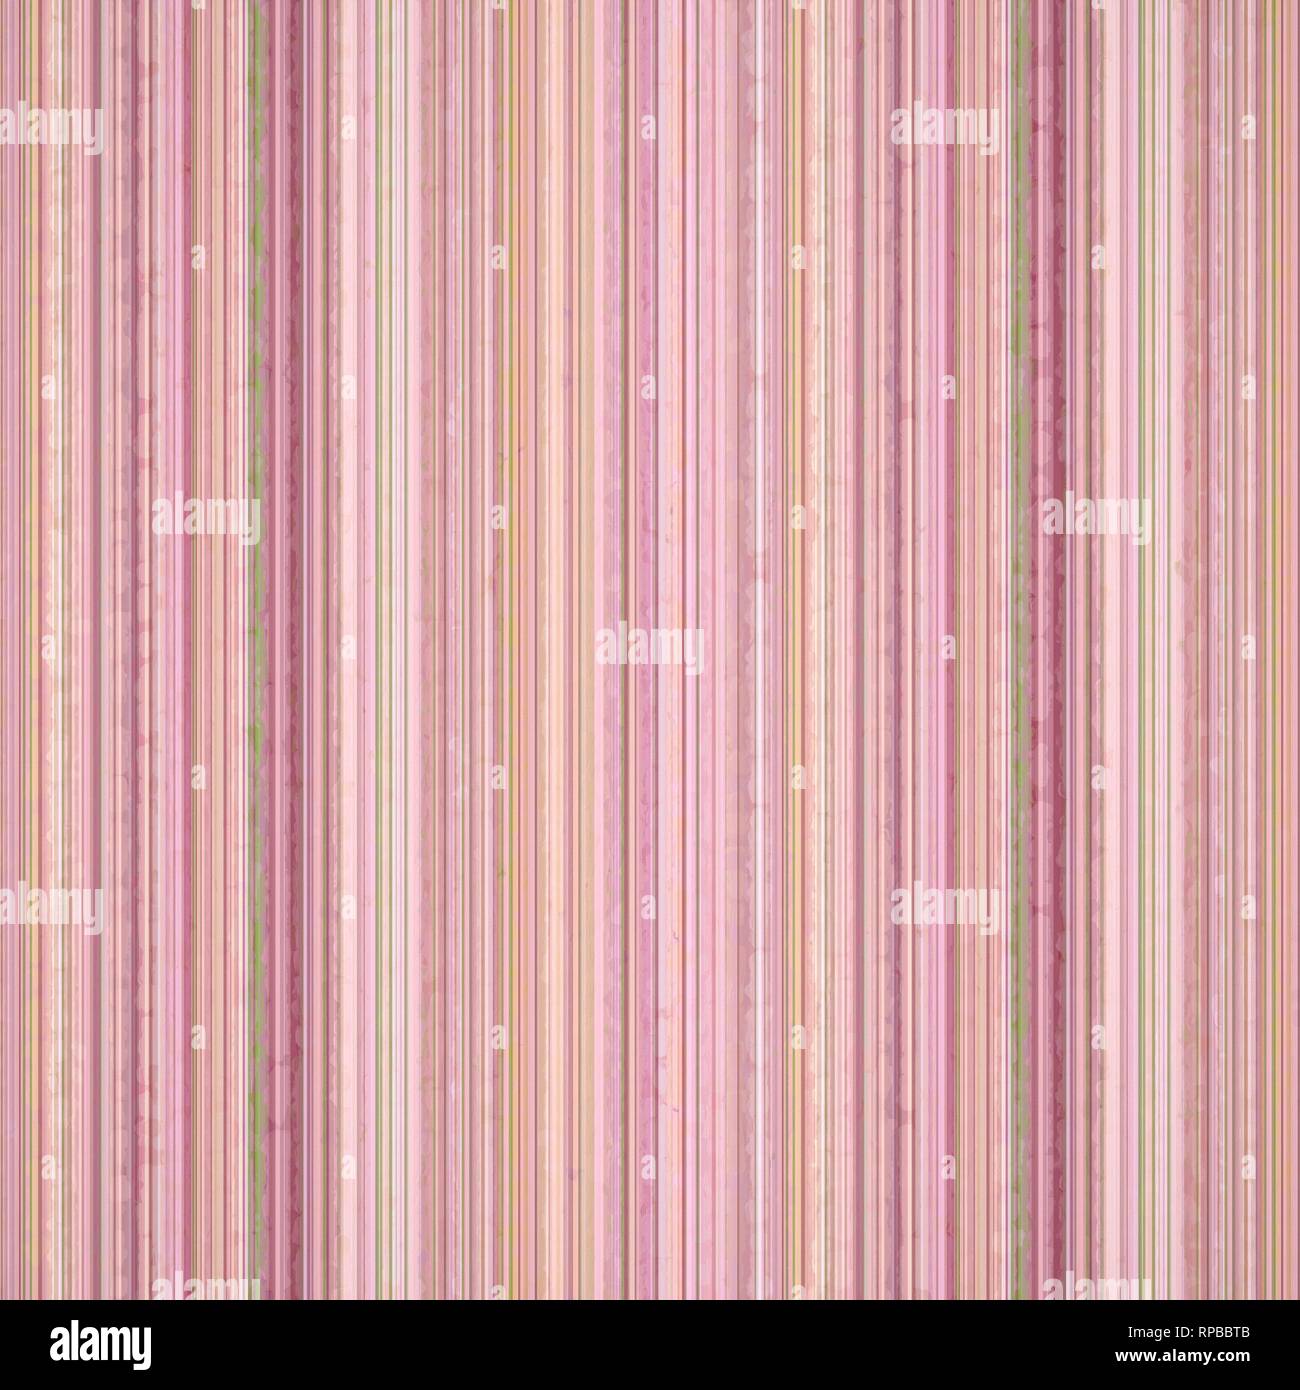 Pink, beige, white, striped abstract background Stock Photo